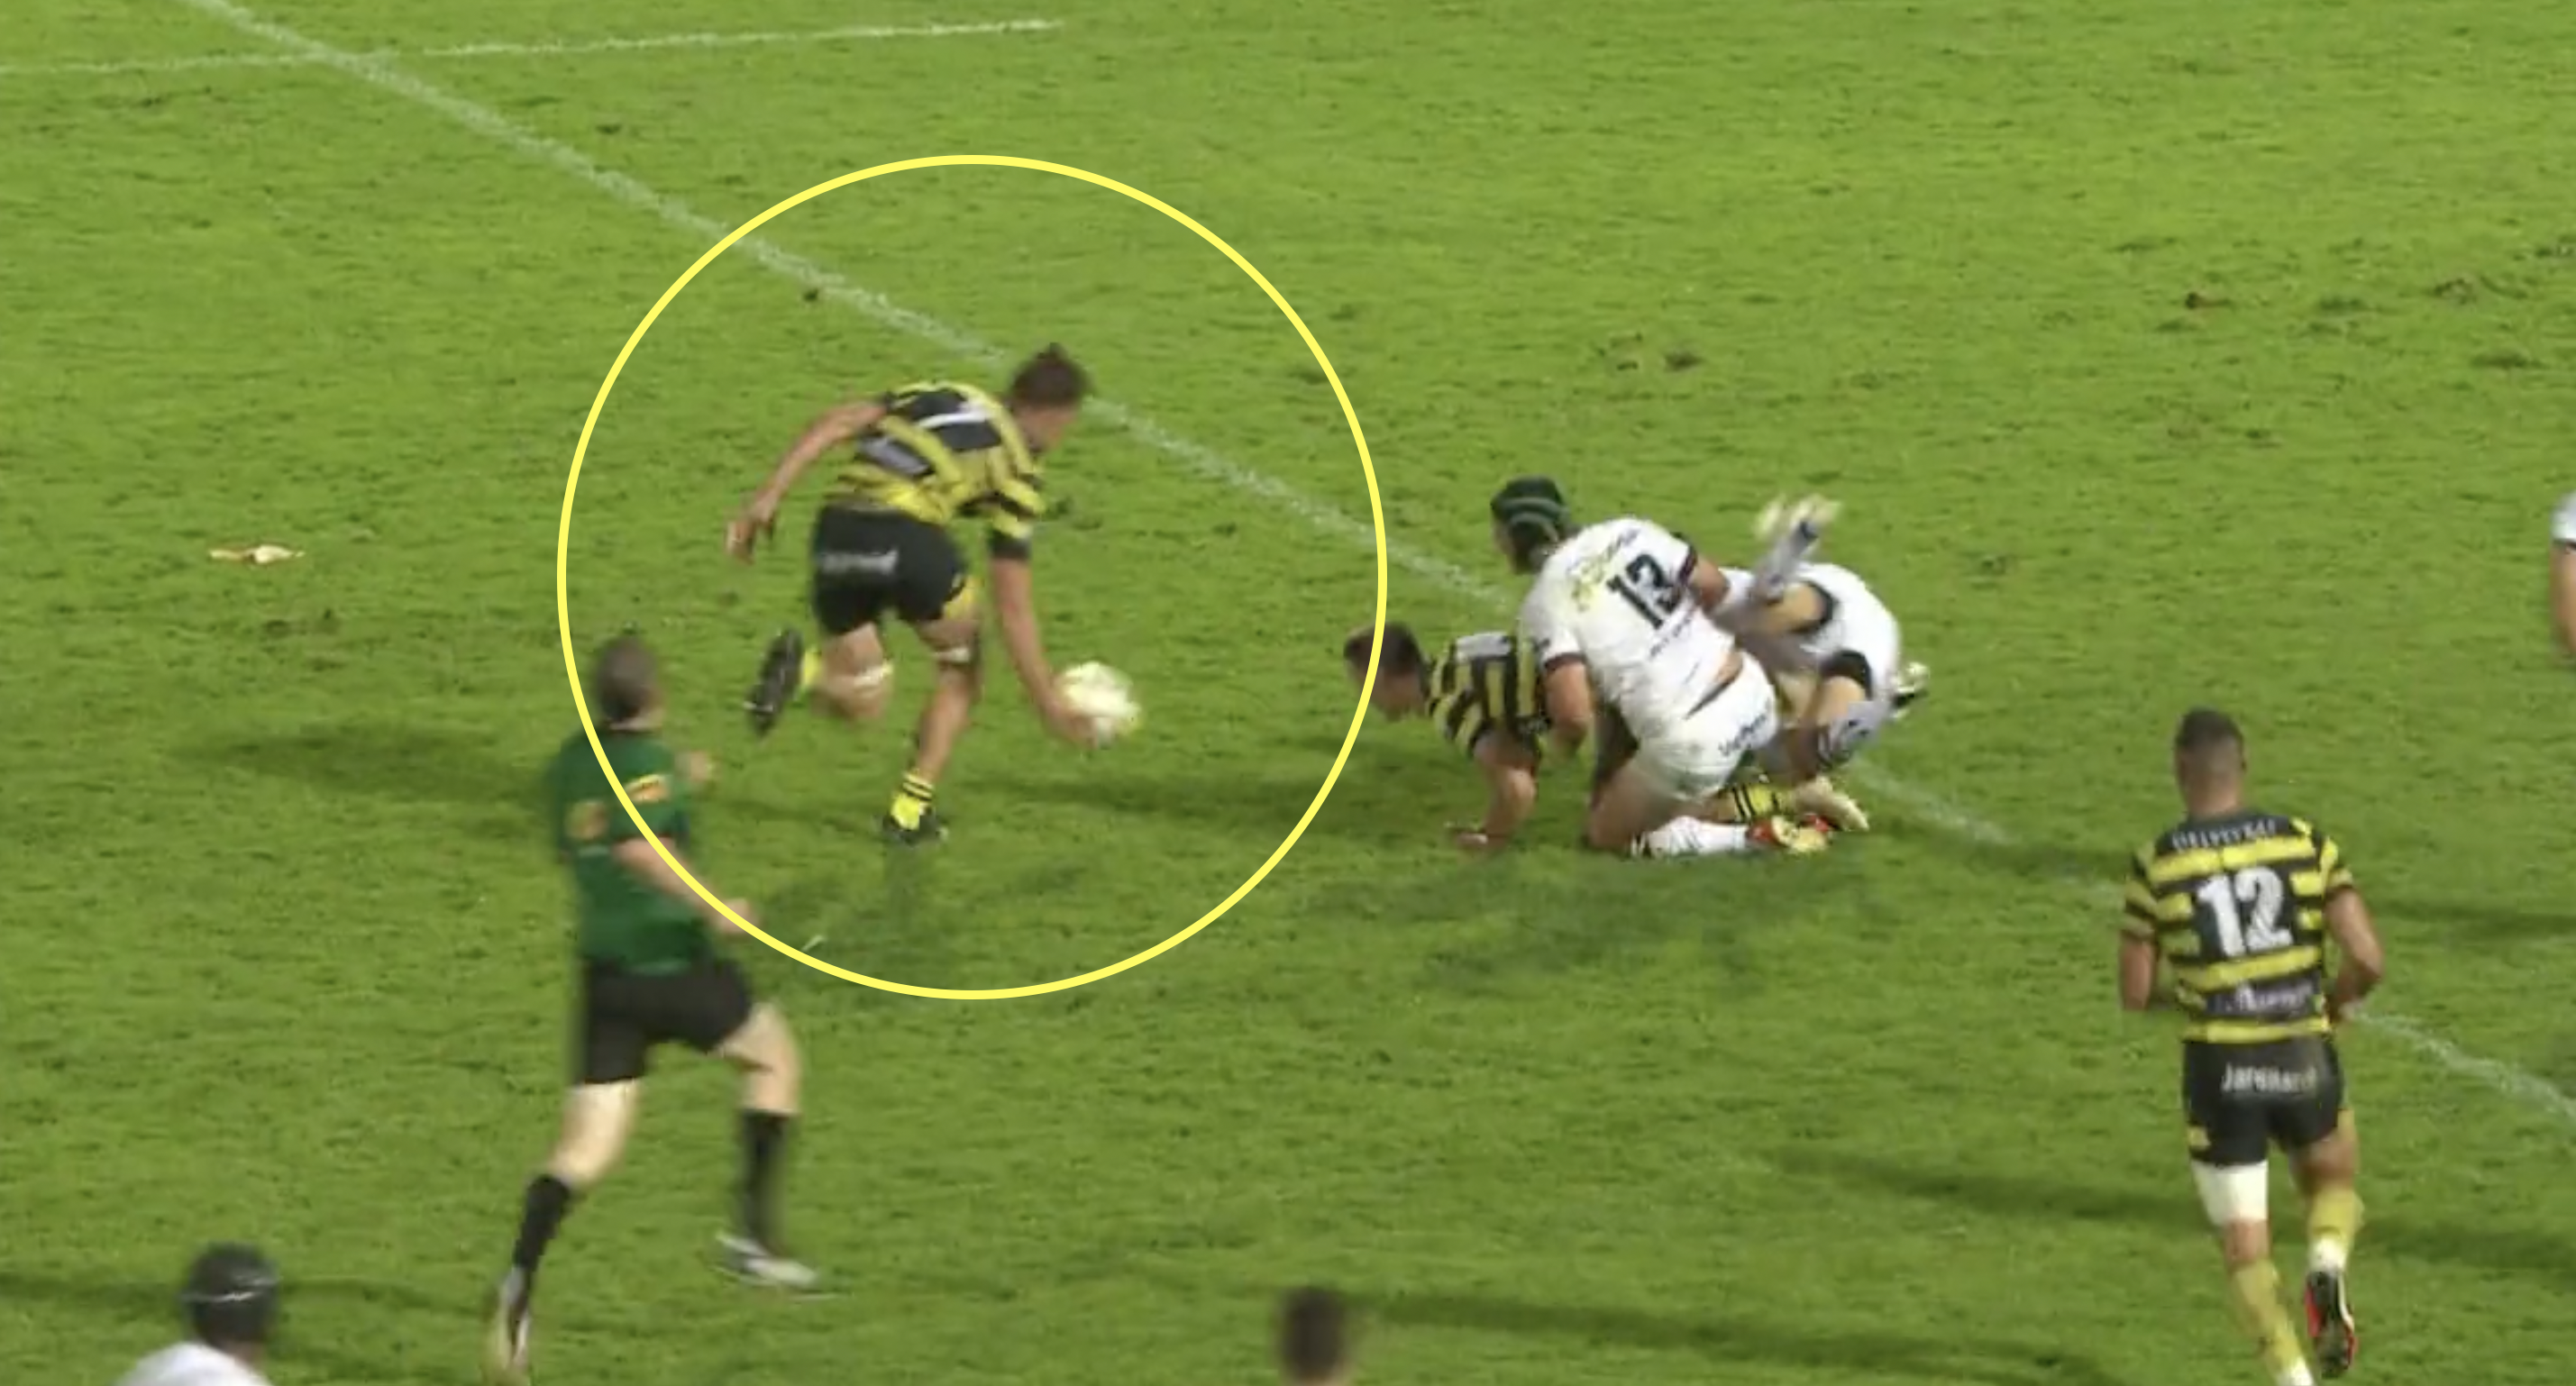 Yet more breathtaking rugby from France's second division